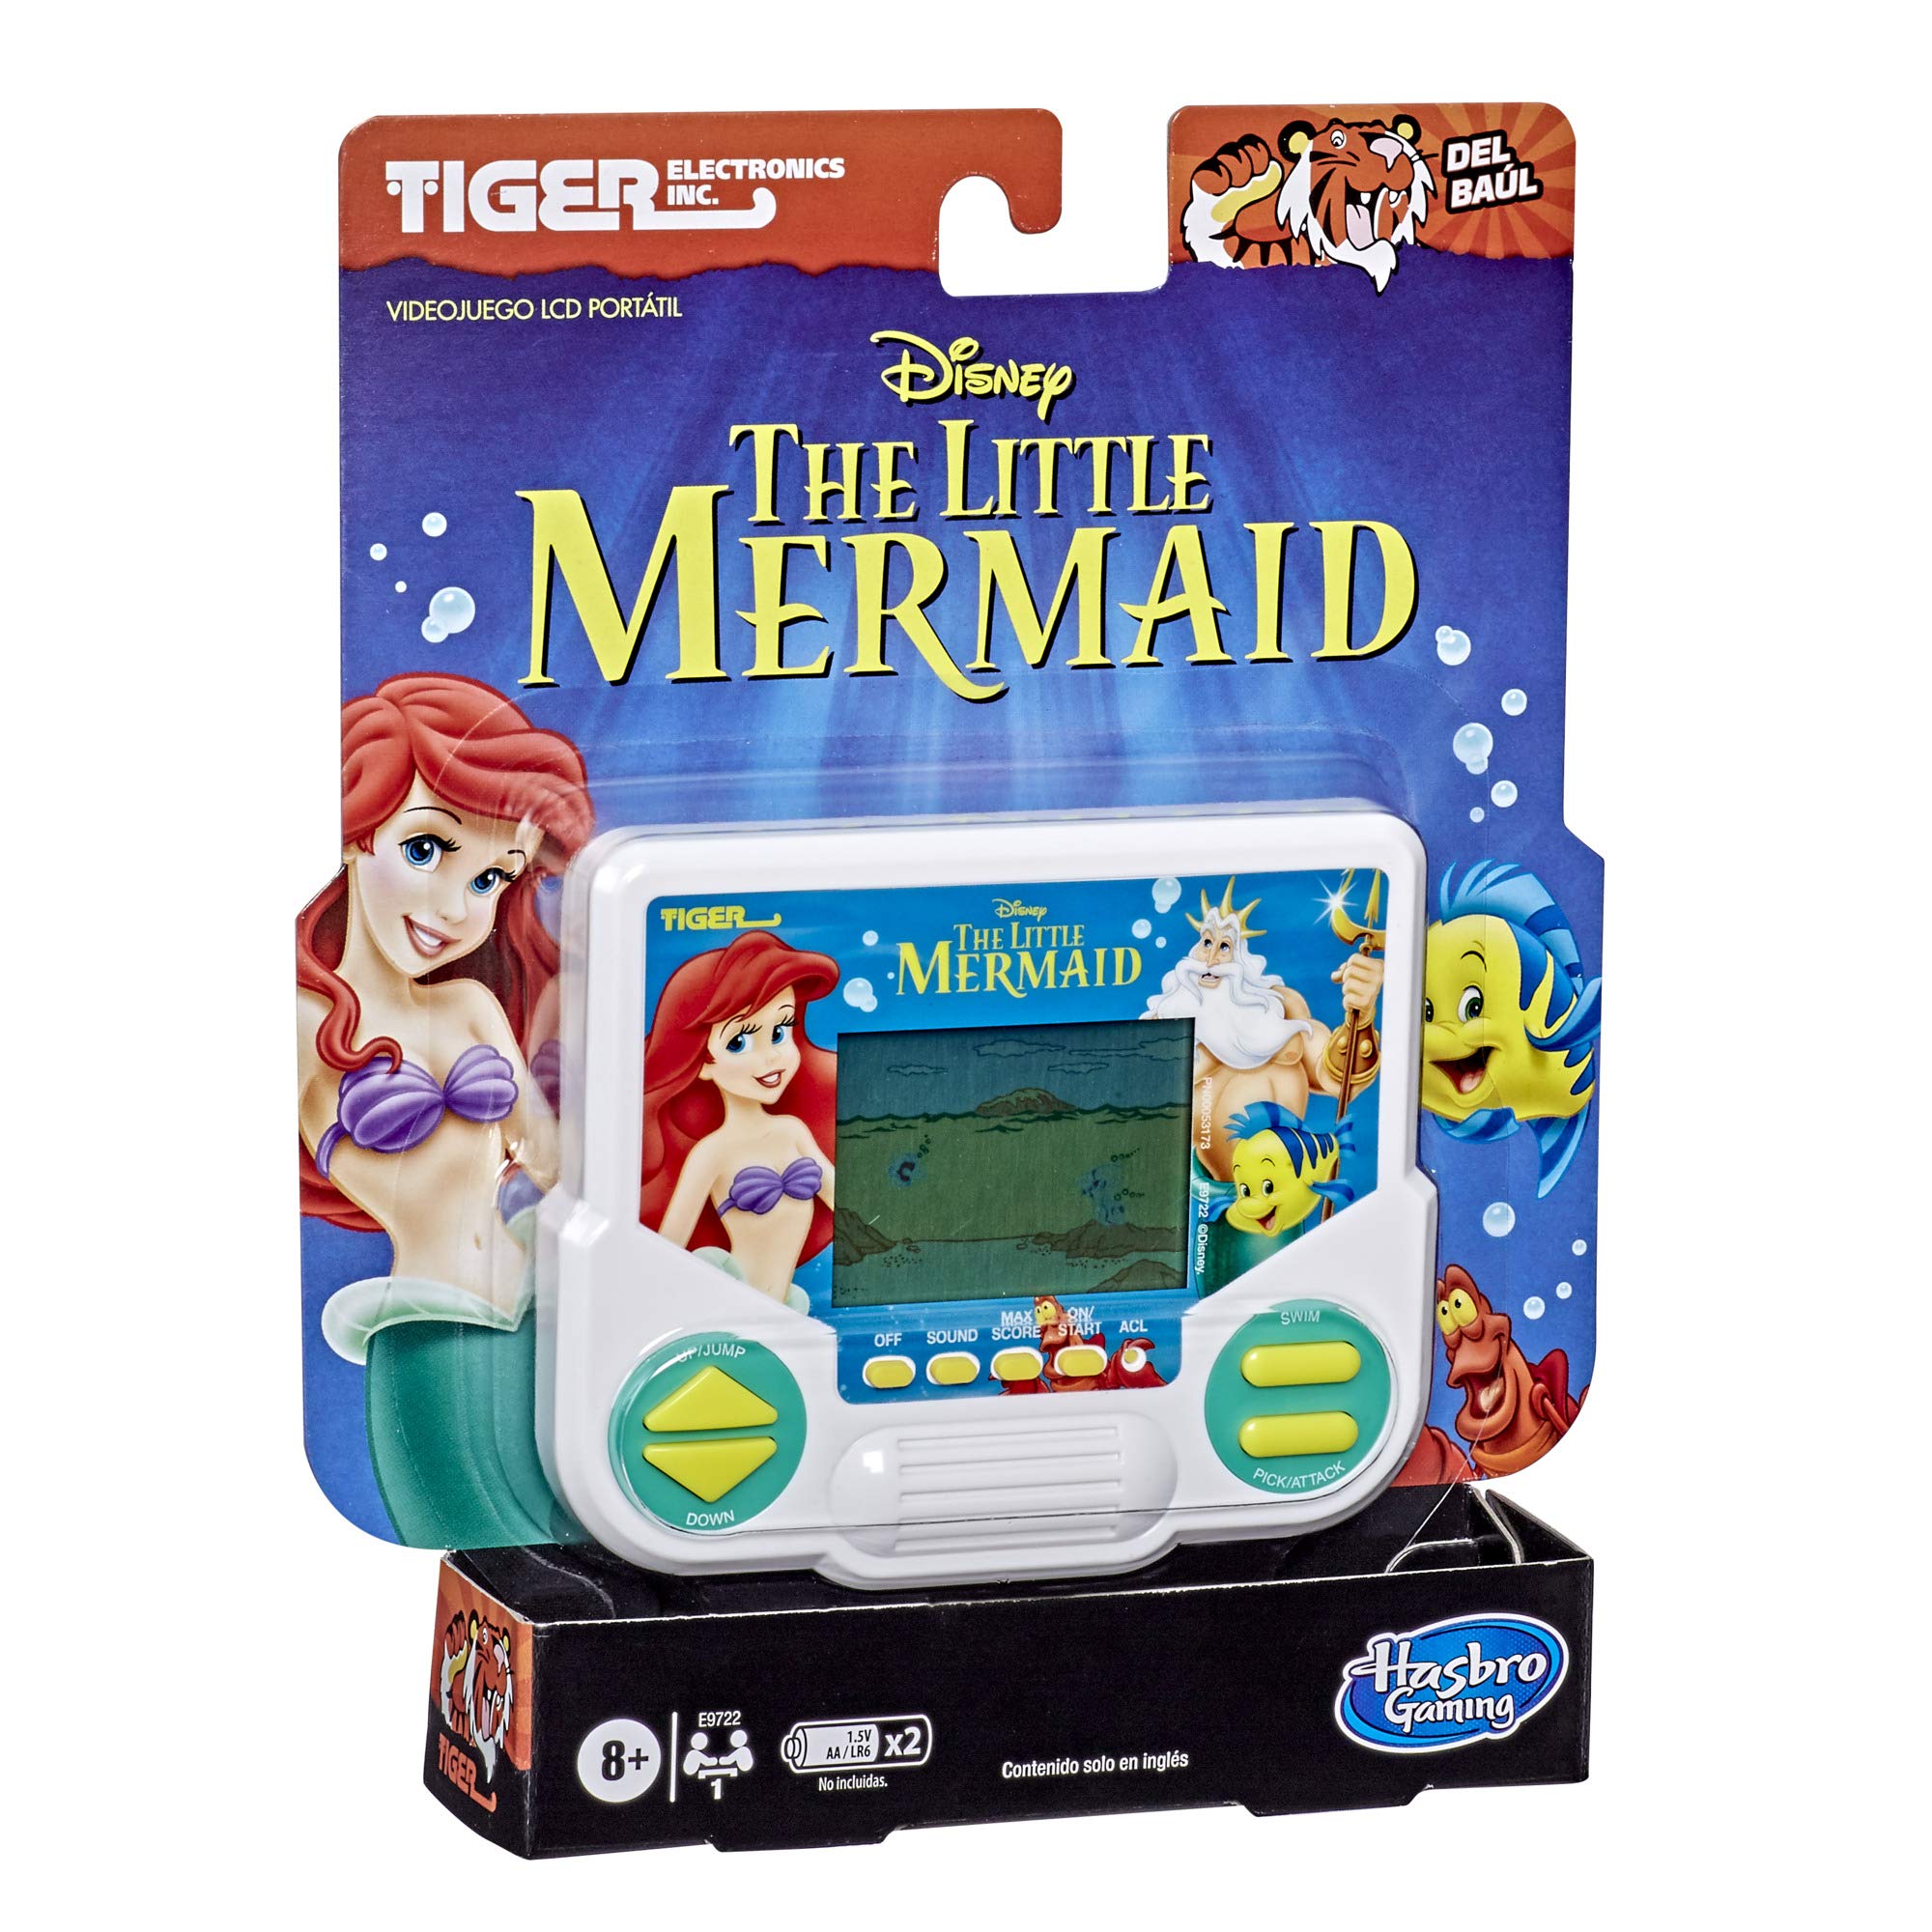 Hasbro Gaming Tiger Electronics Disney''s The Little Mermaid Electronic LCD Video Game, Retro-Inspired Edition, Handheld 1-Player Game, Ages 8 and Up , Blue